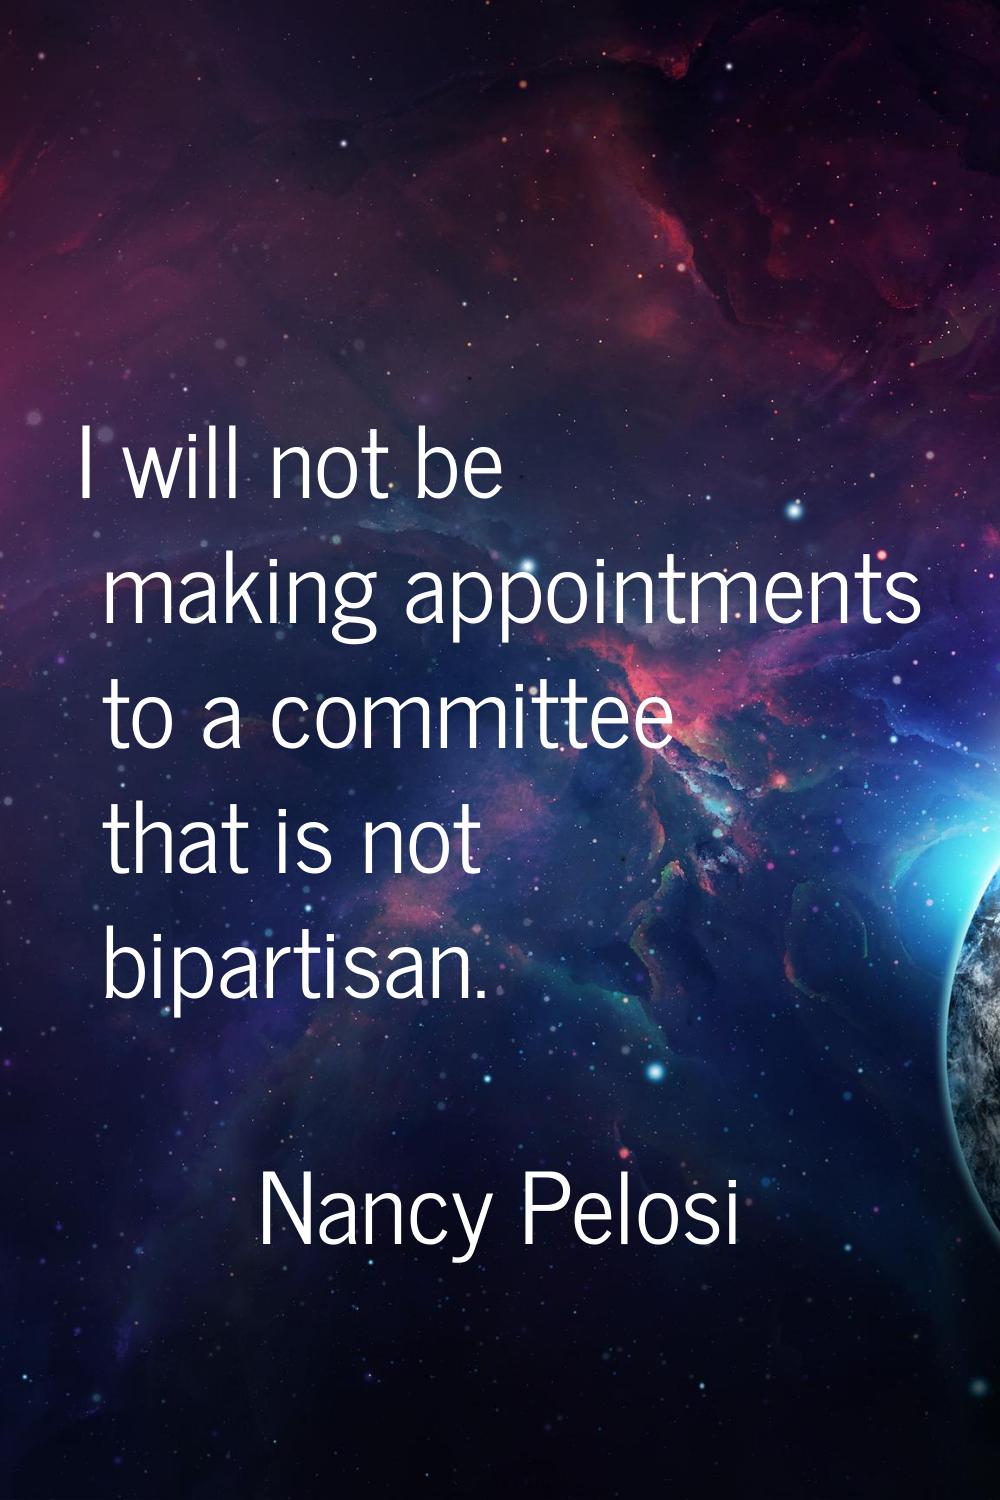 I will not be making appointments to a committee that is not bipartisan.